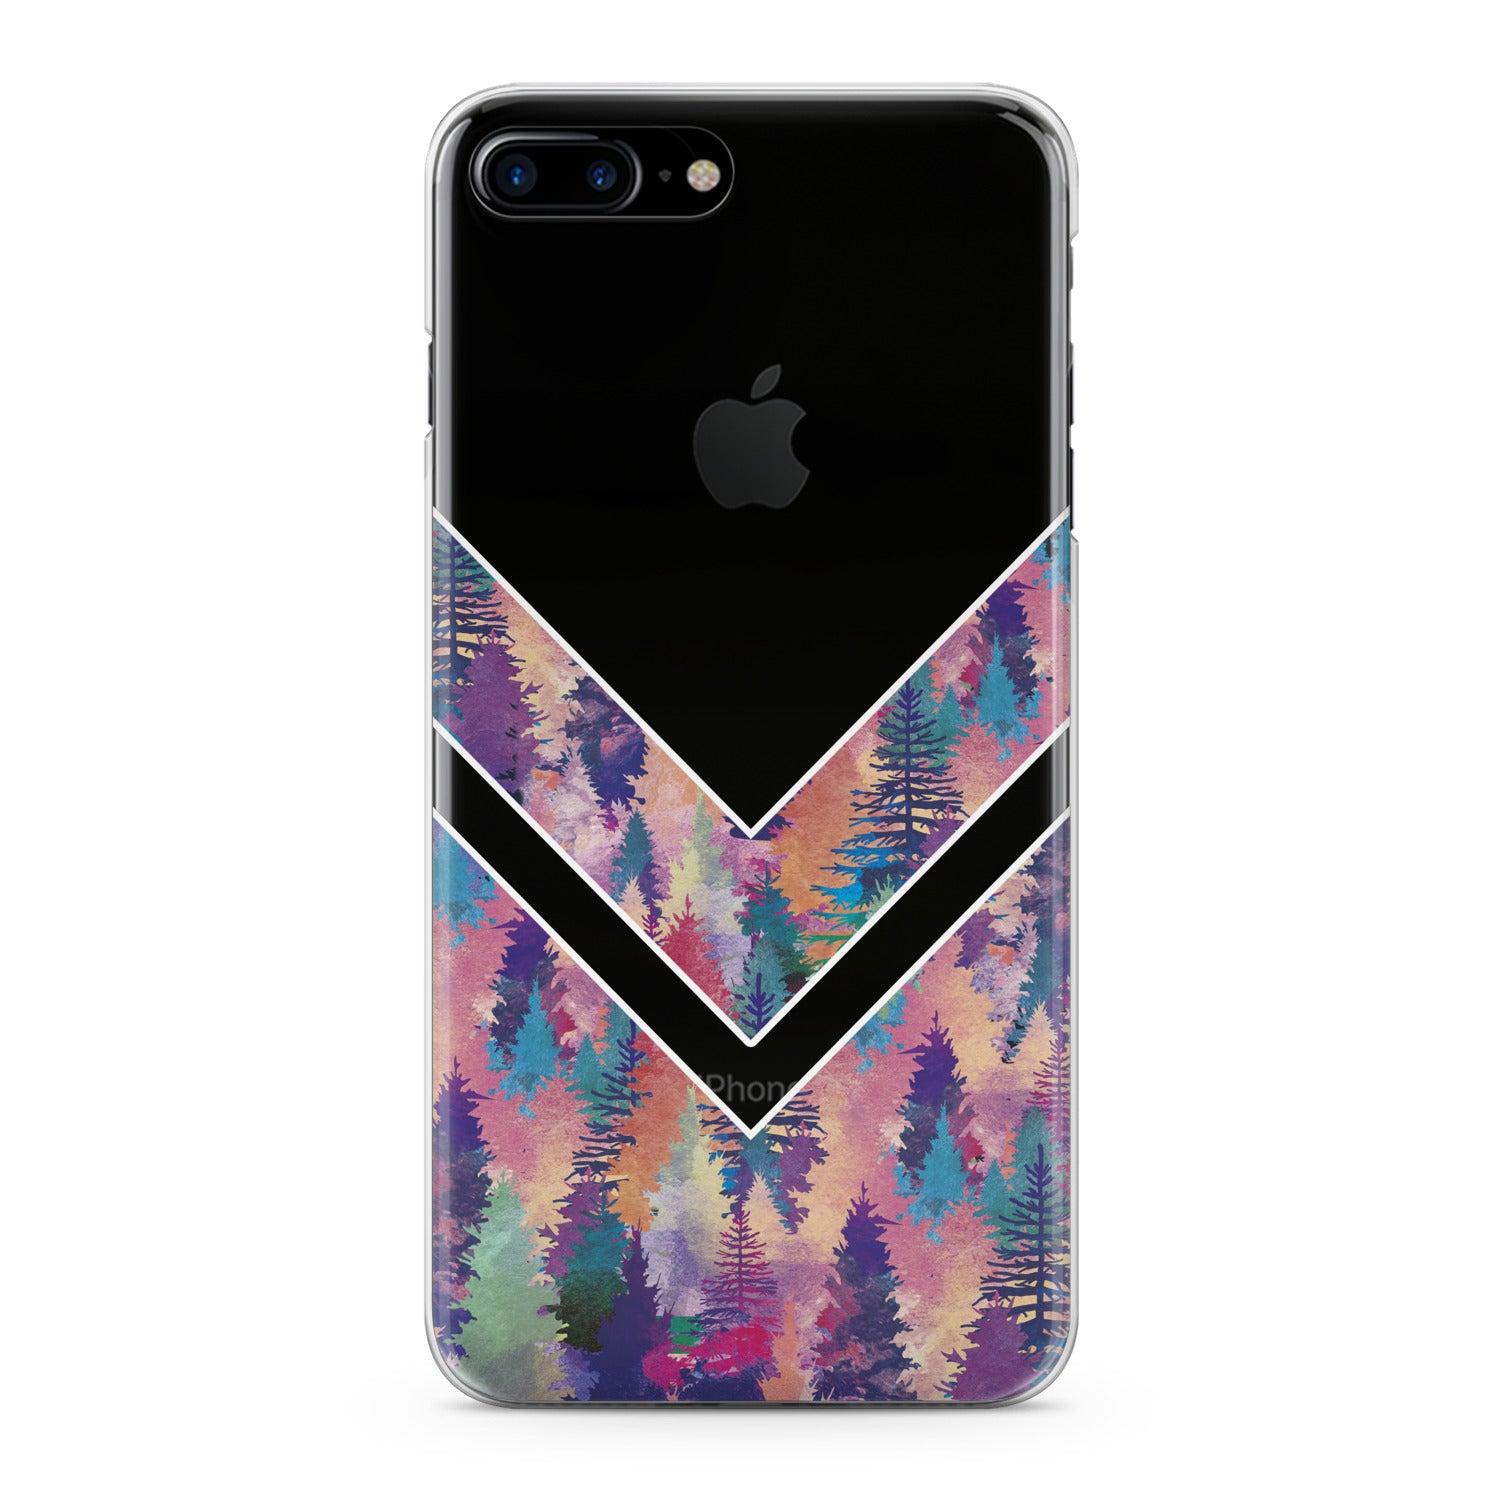 Lex Altern Forest Abstraction Phone Case for your iPhone & Android phone.